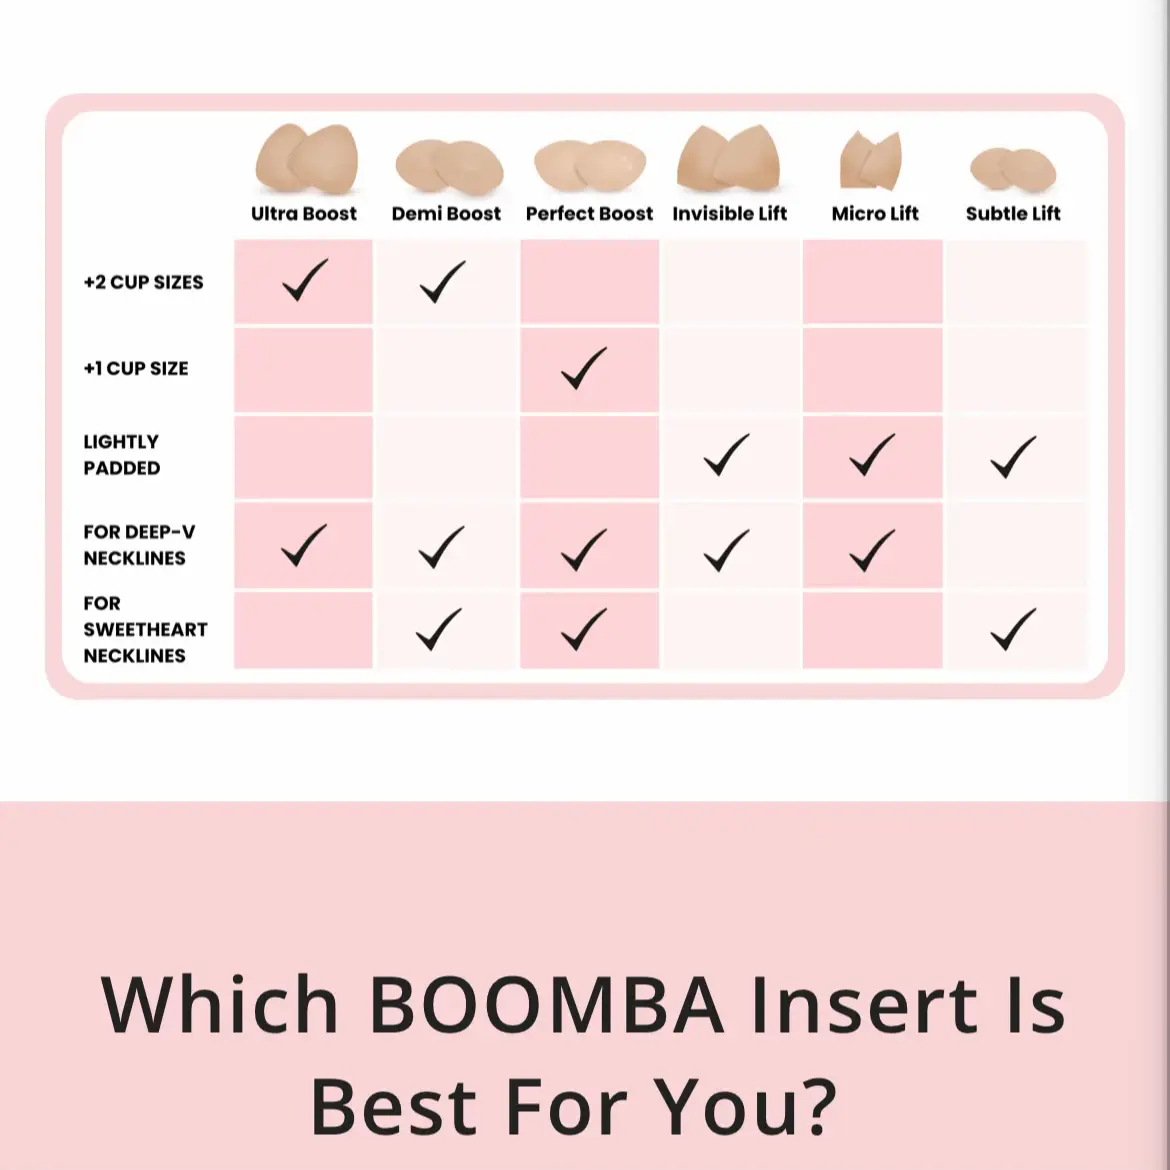 BOOMBA - What's the difference between the 3 insert